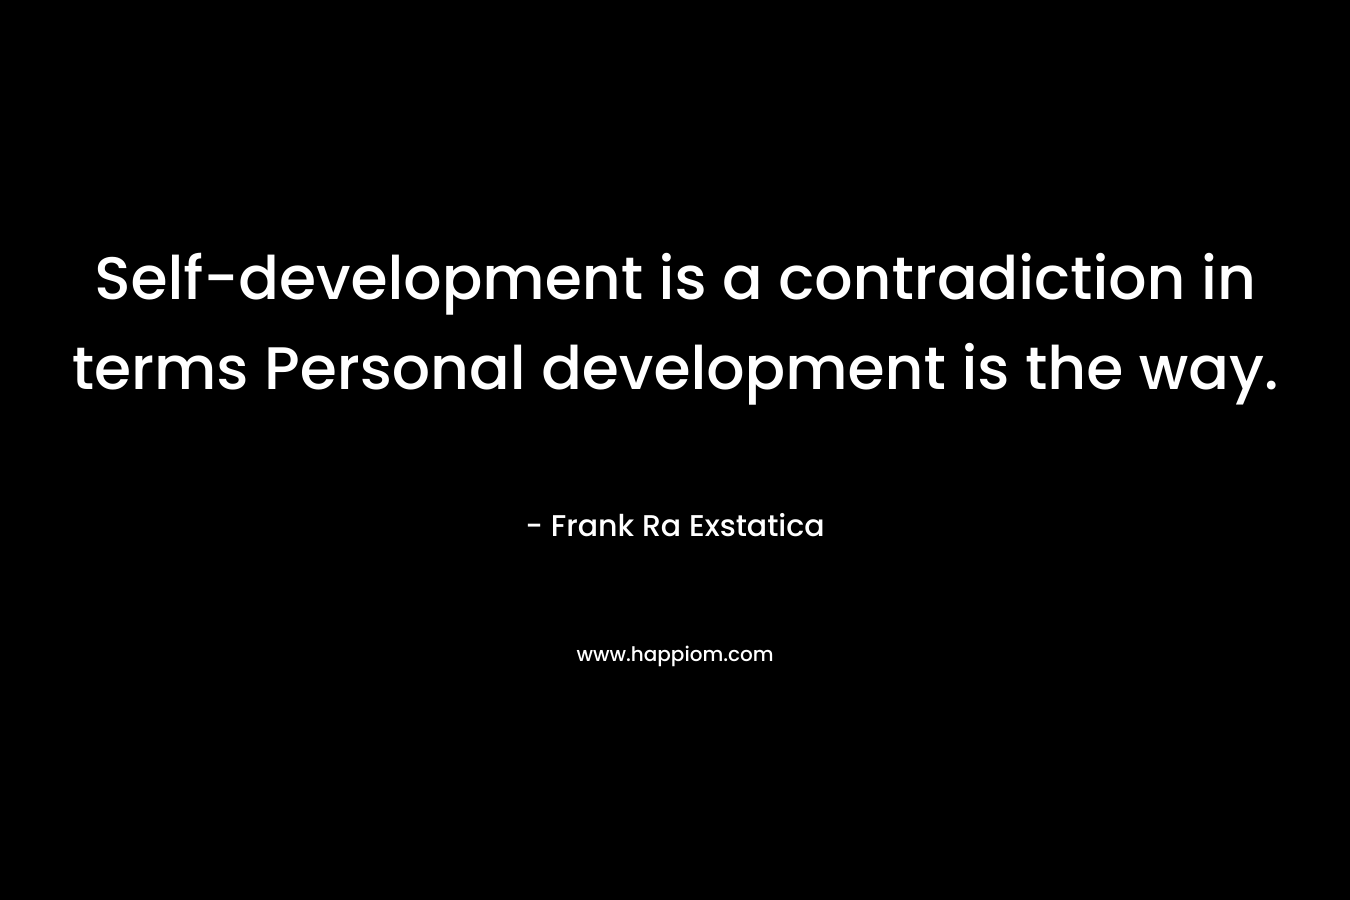 Self-development is a contradiction in terms Personal development is the way.